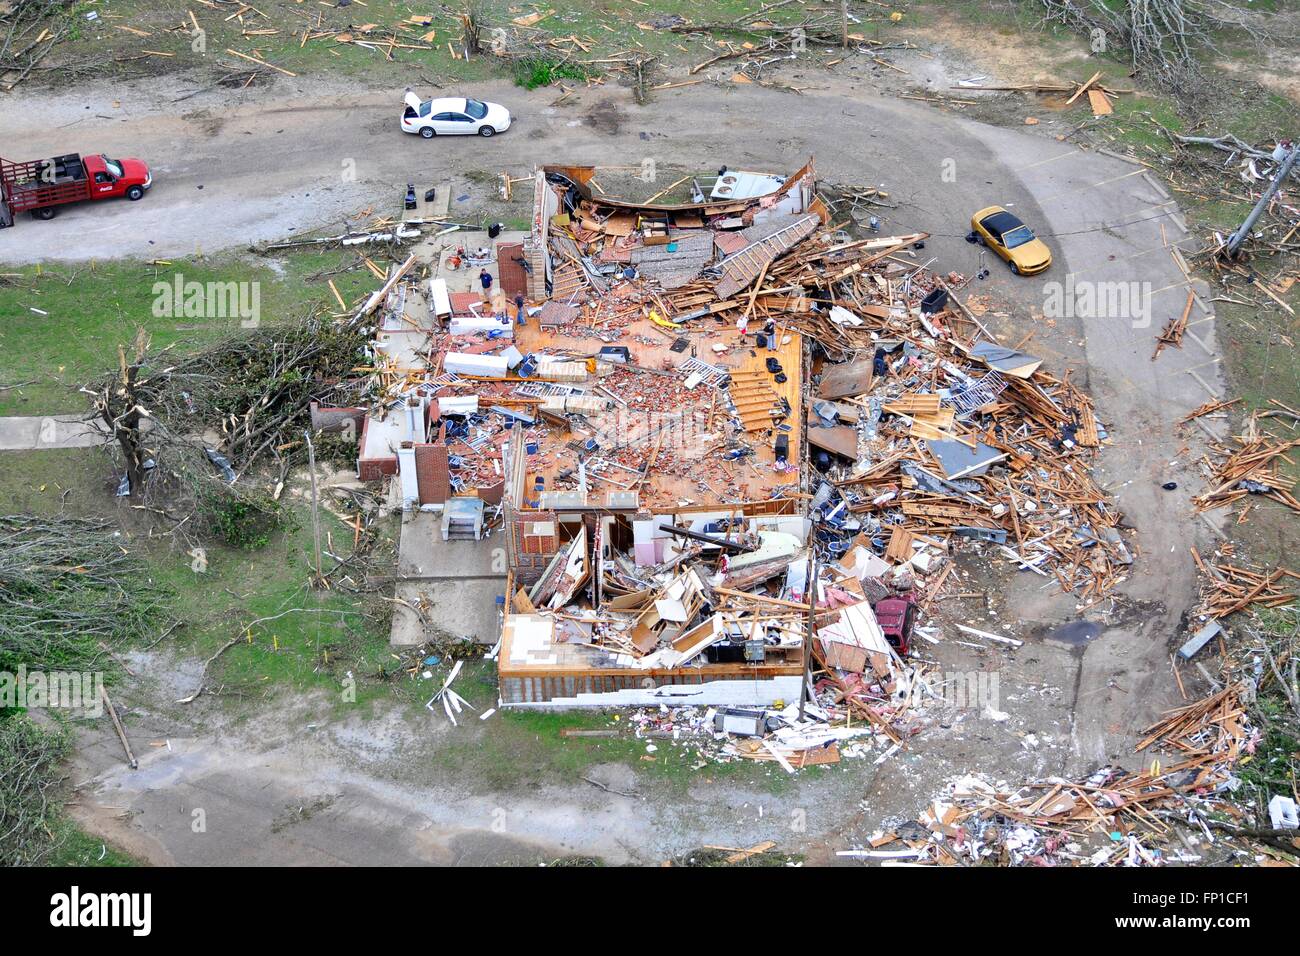 Aerial view of a home destroyed by tornadoes that swept across the southern states killing 35 people April 29, 2014 in Tupelo, Mississippi. Stock Photo